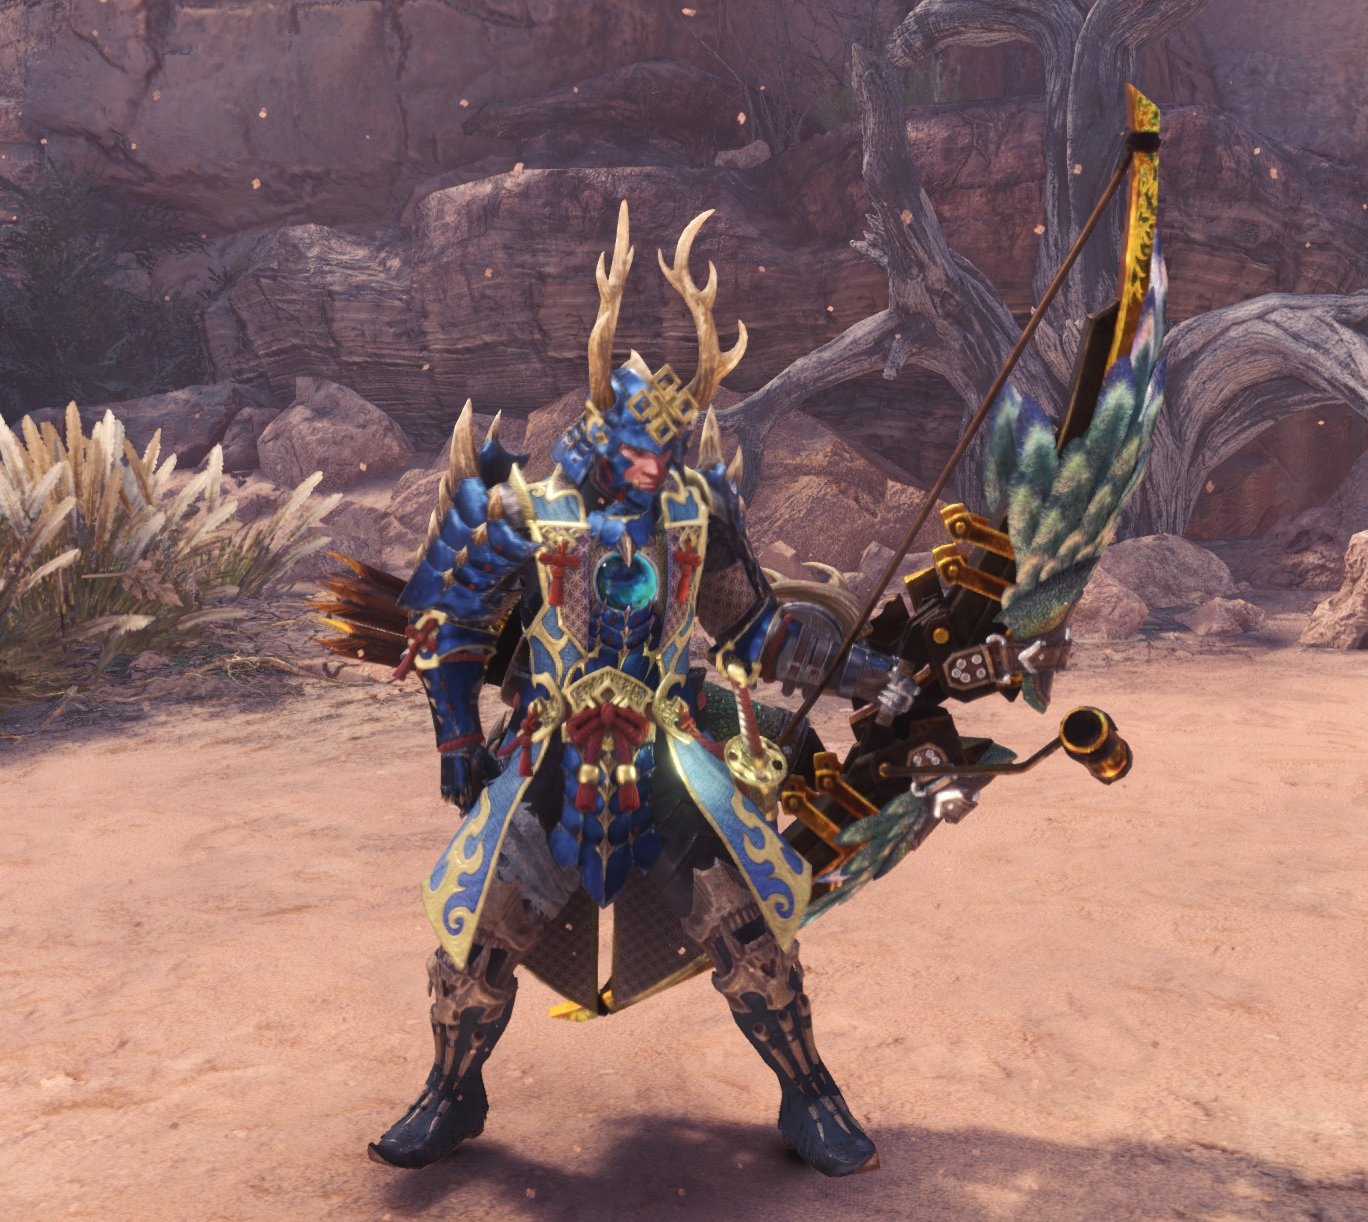 Pre Iceborne bow gear progression - Low and High rank